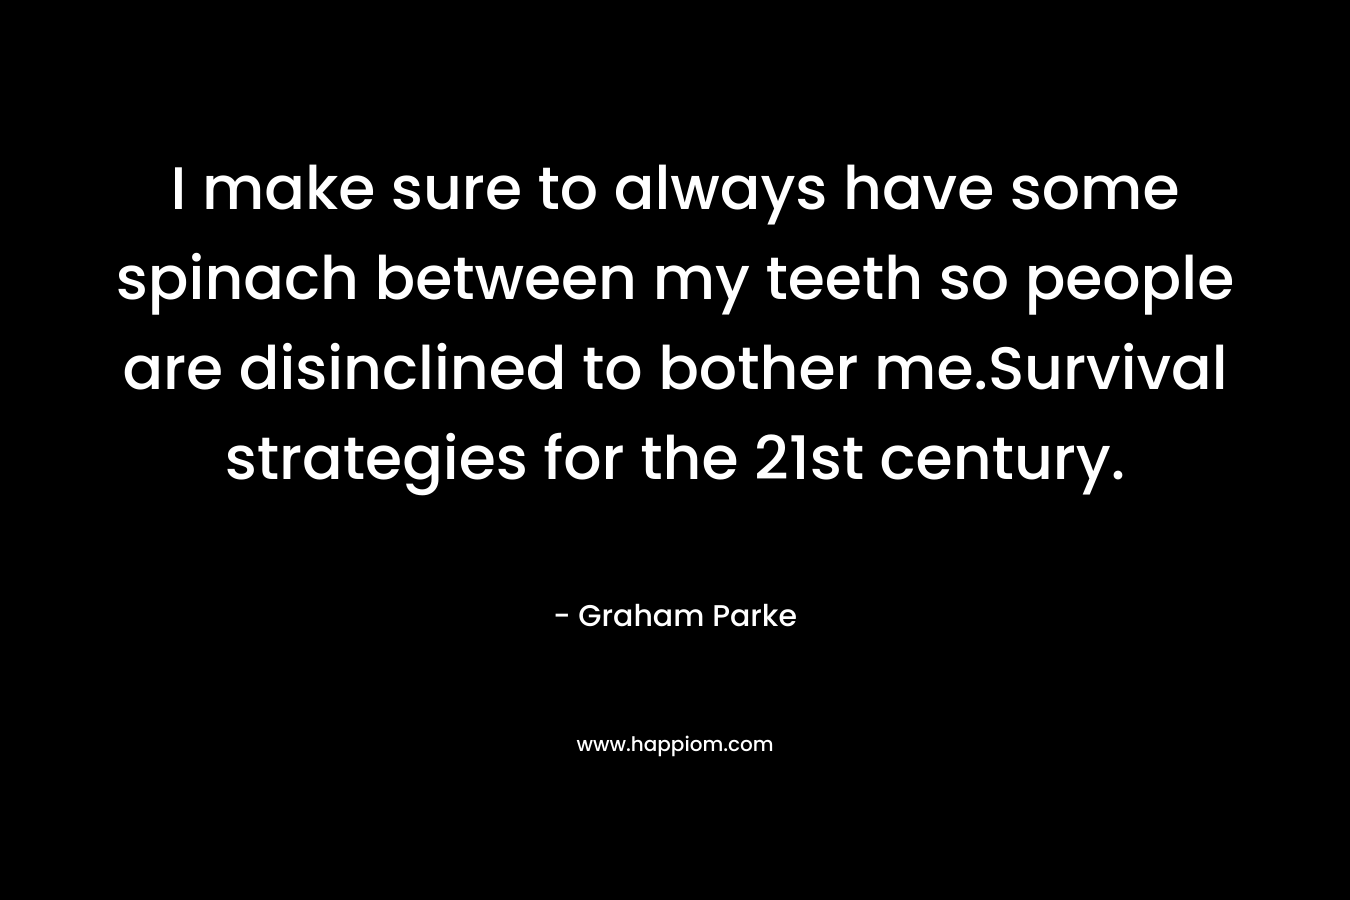 I make sure to always have some spinach between my teeth so people are disinclined to bother me.Survival strategies for the 21st century. – Graham Parke